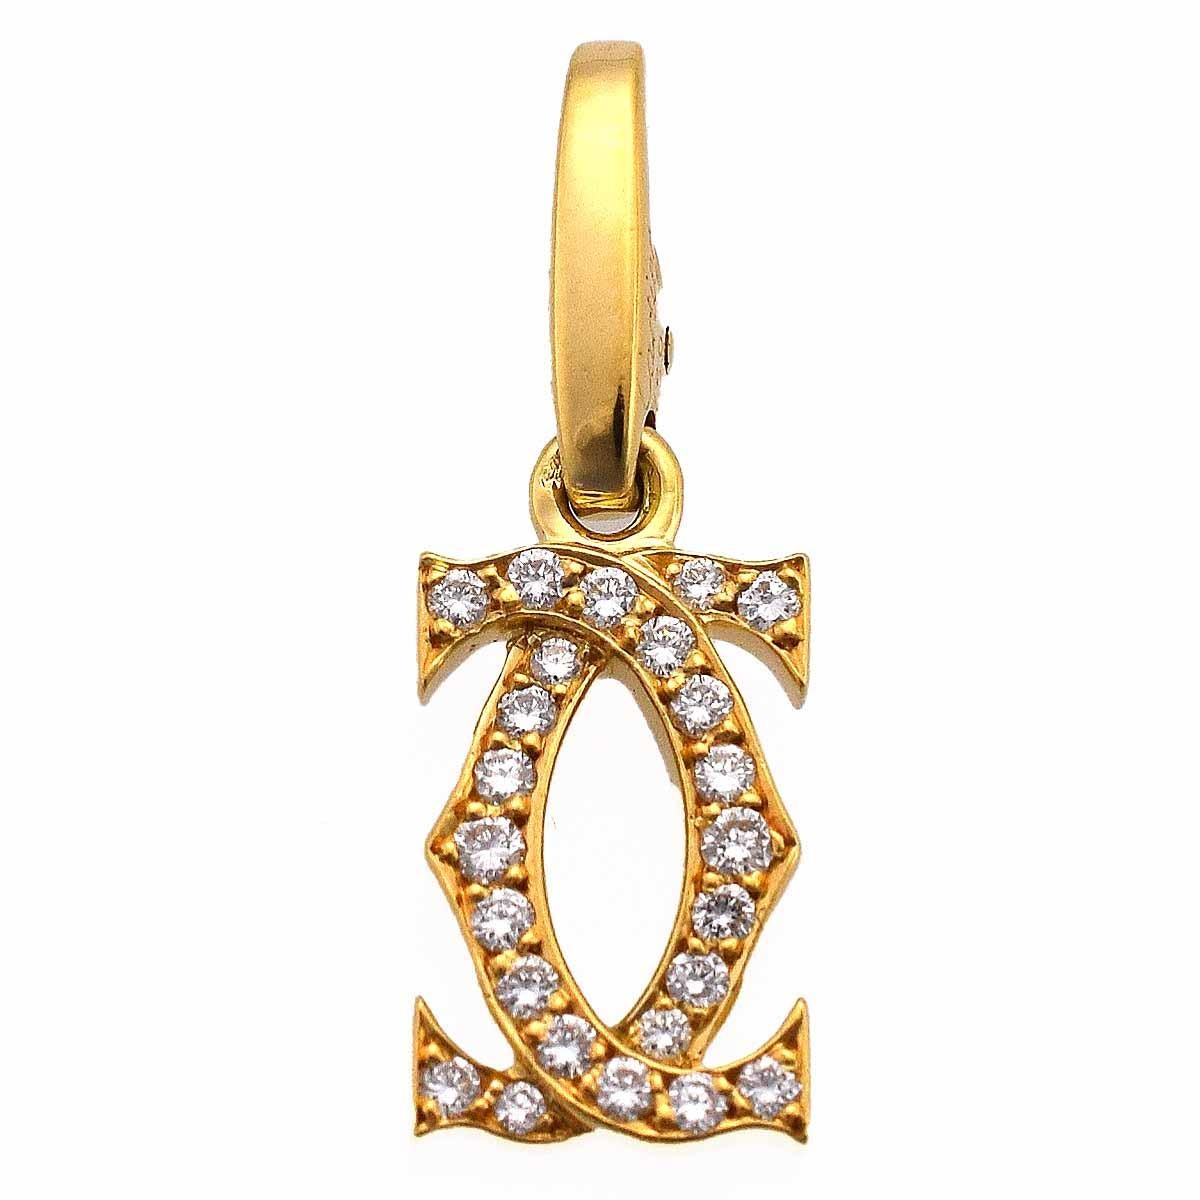 Brand:Cartier
Name:2C Charm
Material:Diamond, 750 K18 YG yellow gold
Weight:2.2g（Approx)
Size:W8mm×H25mm×D2mm / W0.31